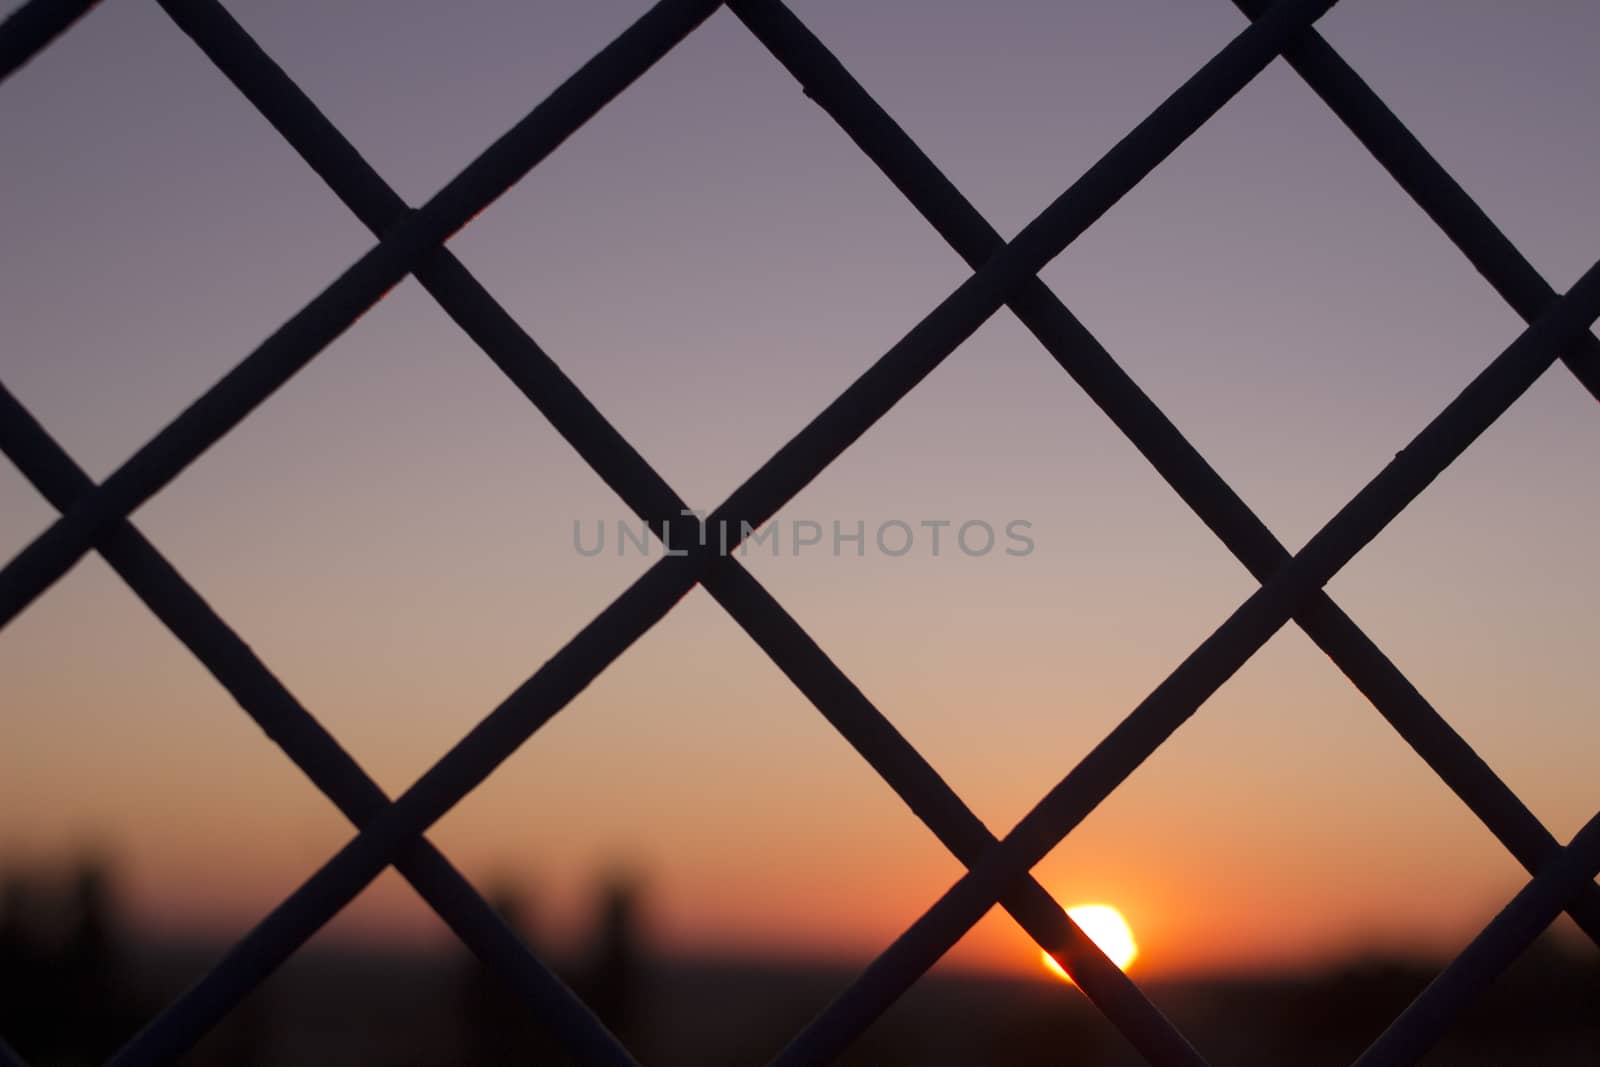 Horizontal color digital photo of setting evening sun and red and blue sky shining through a metal wire mesh fence in silhouette at dusk in dark tones with bokeh blur shallow depth of focus defocused landscape background. 